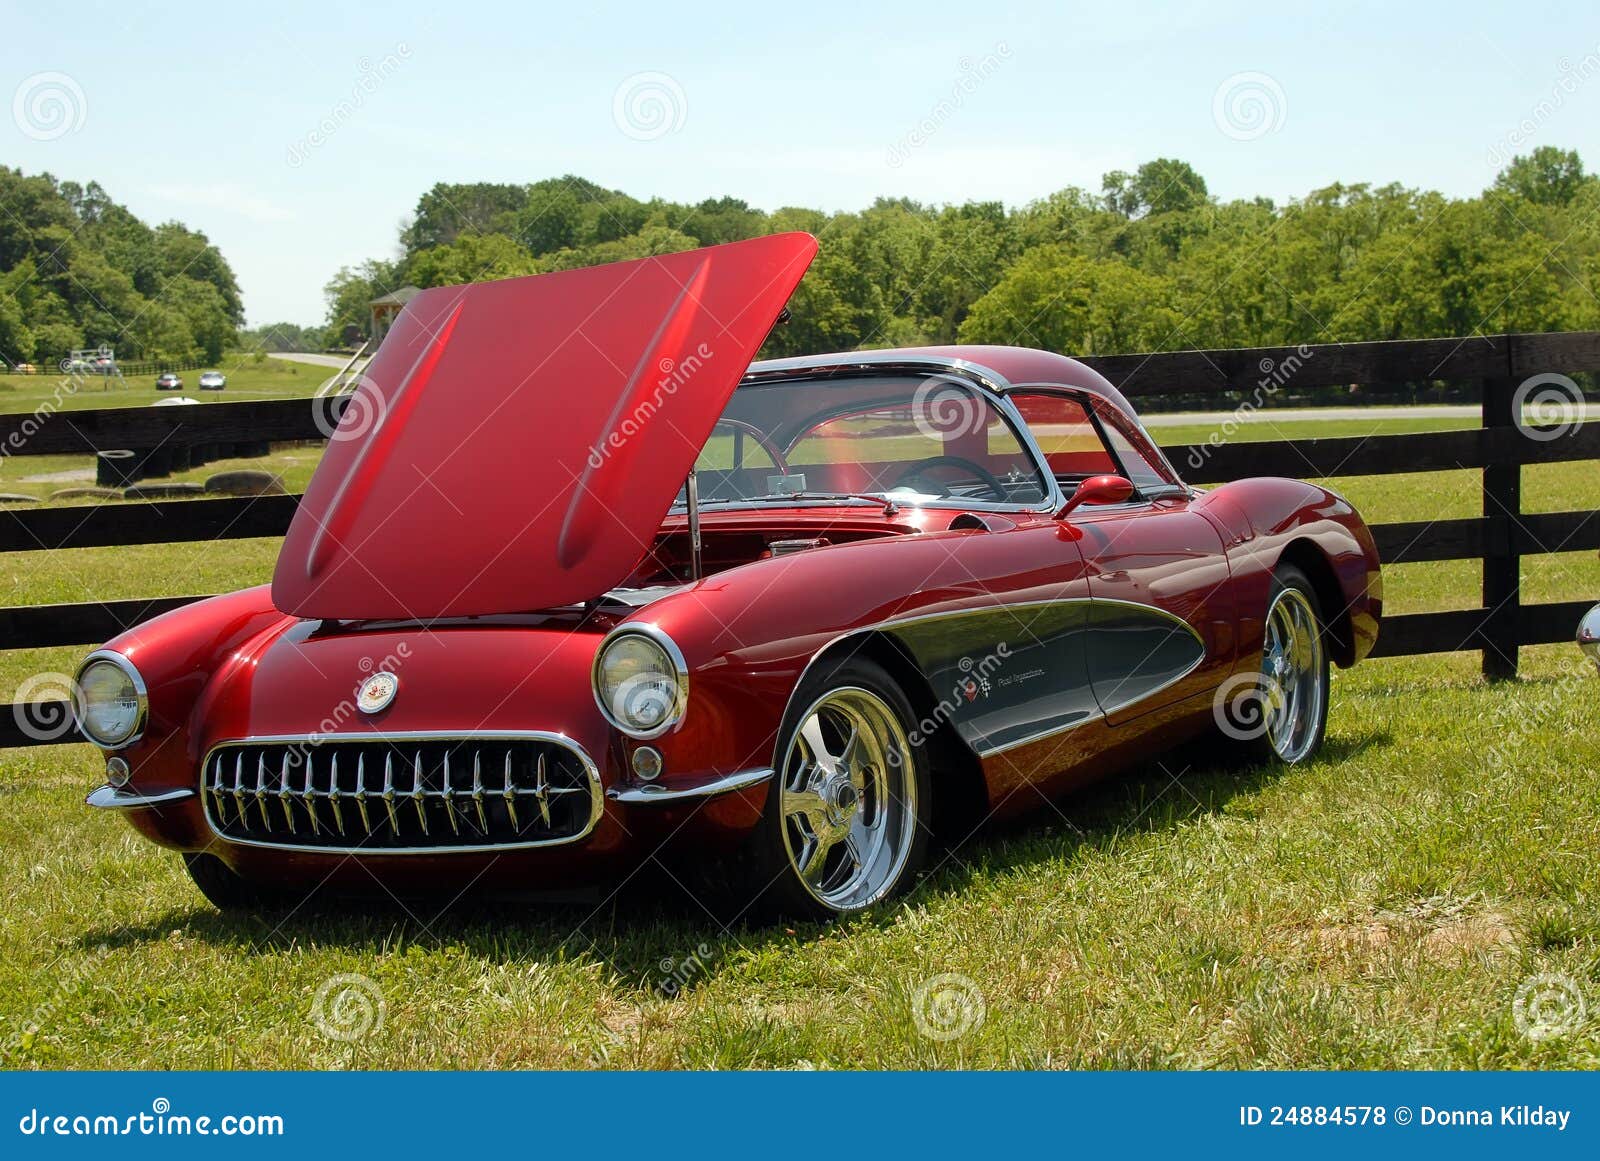 Classic maroon Corvette Sports Car on display at vintage car show at 